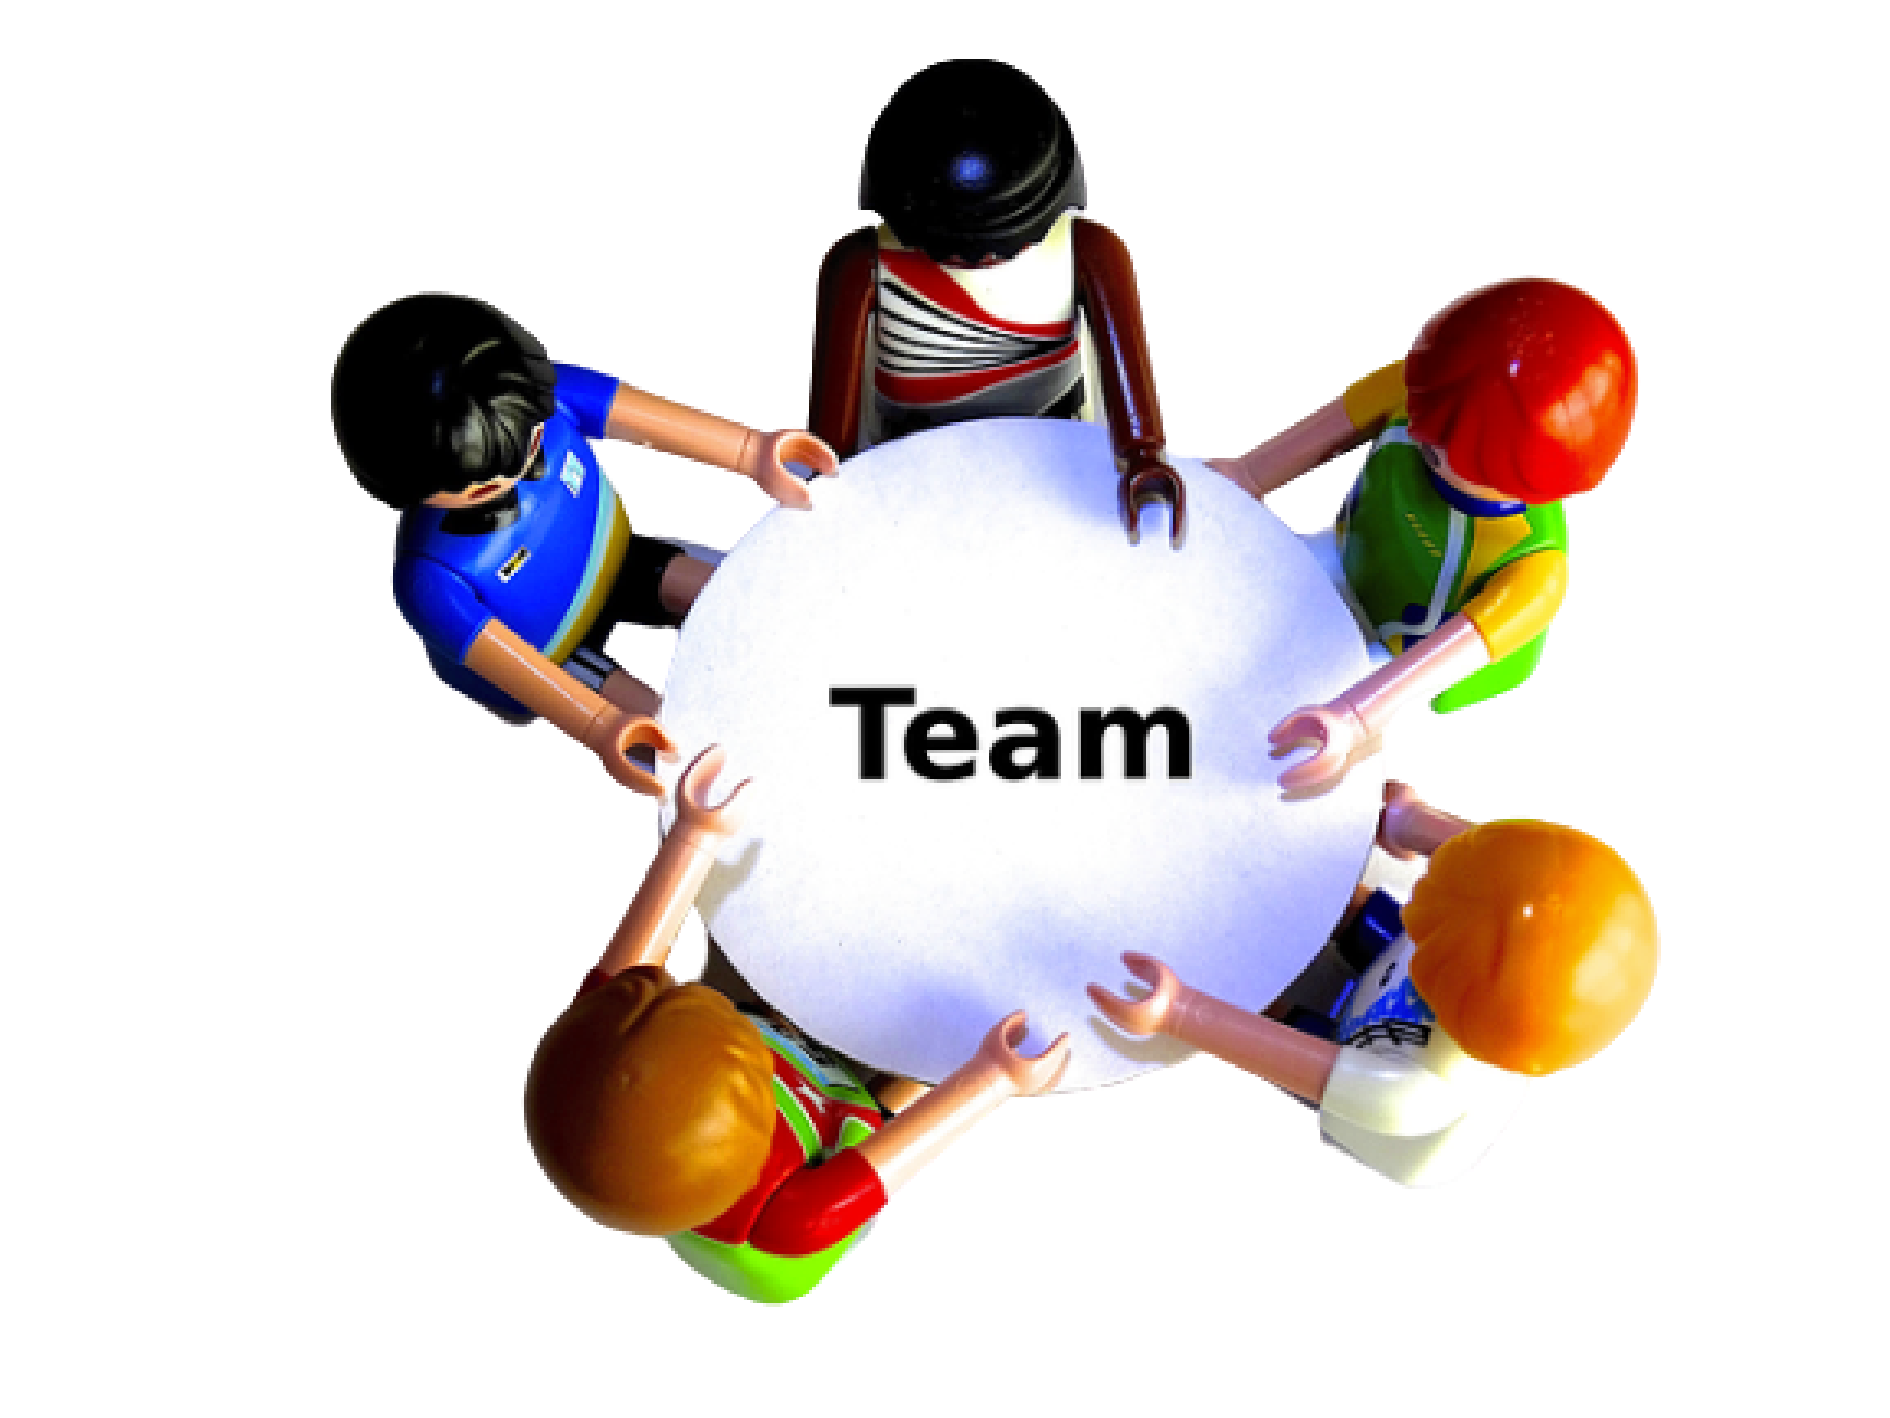 About Team